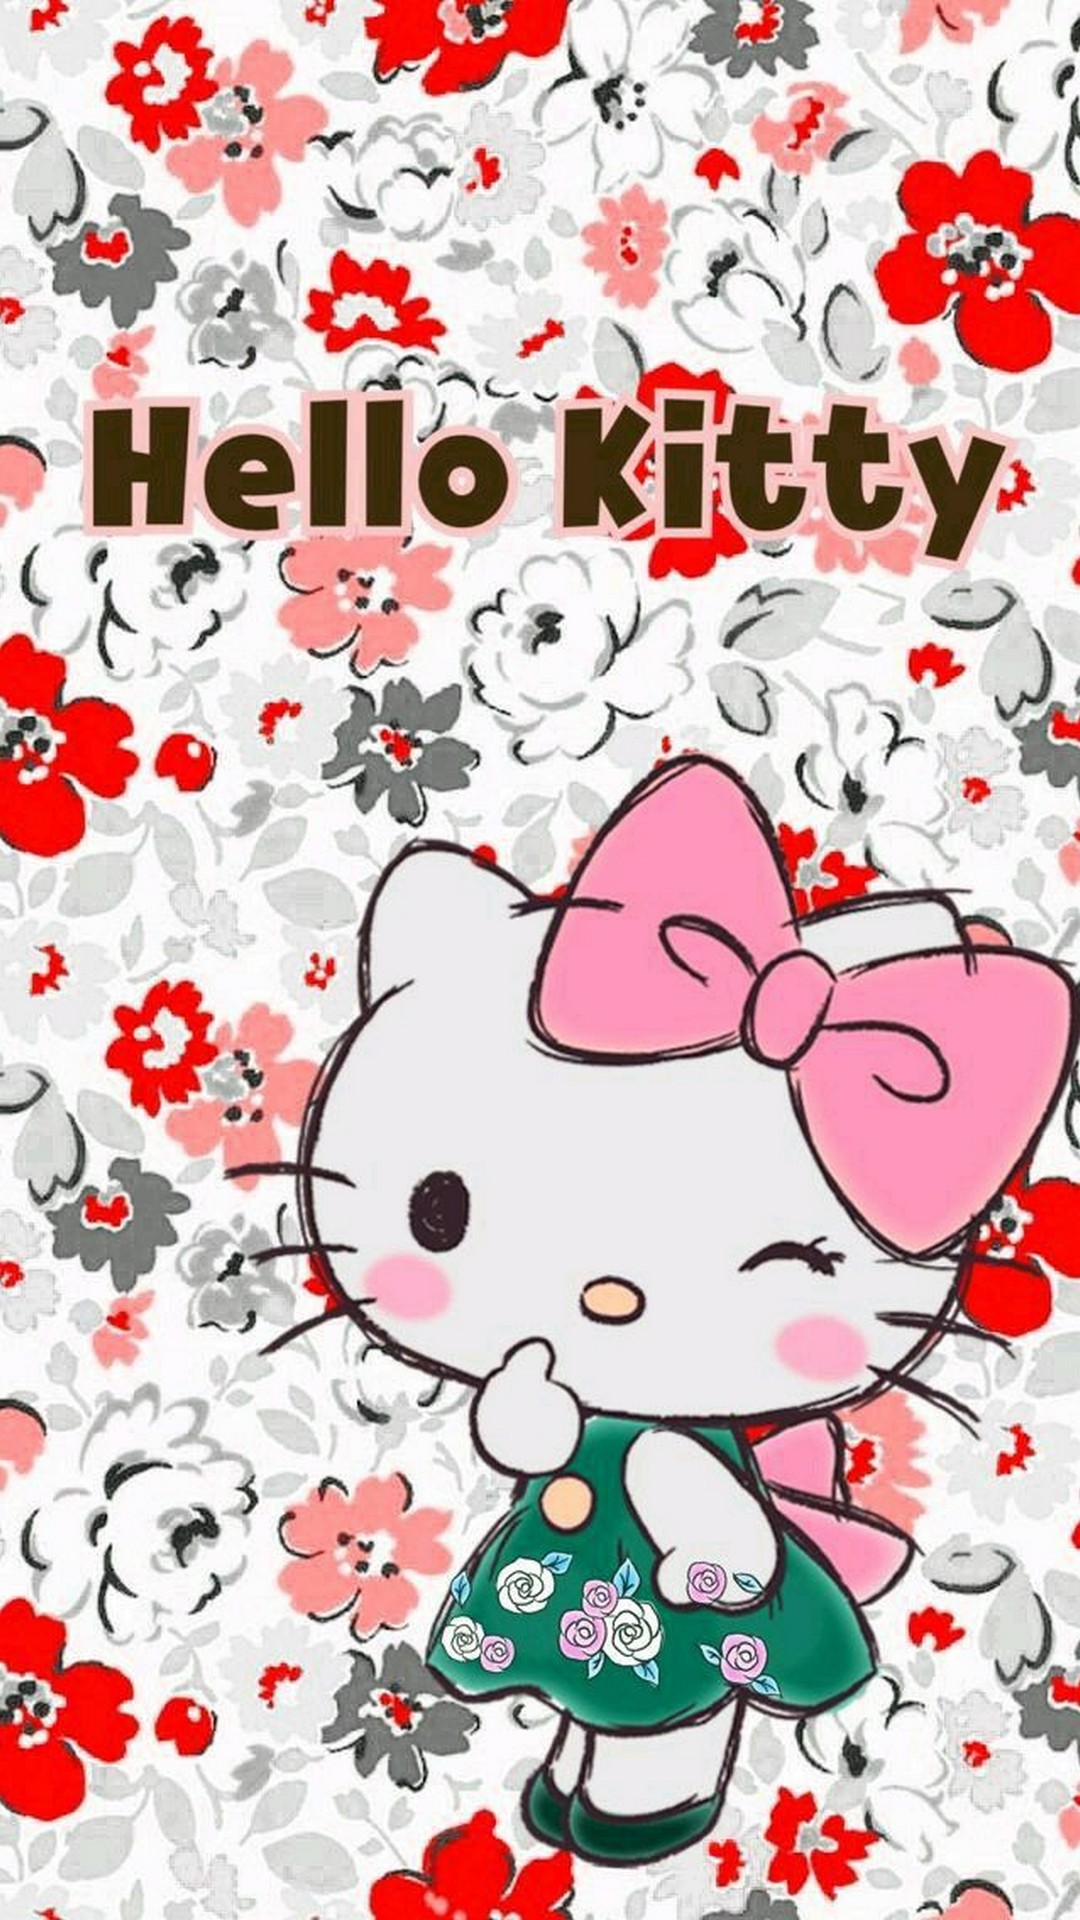 Hello Kitty Characters Wallpaper Android with image resolution 1080x1920 pixel. You can make this wallpaper for your Android backgrounds, Tablet, Smartphones Screensavers and Mobile Phone Lock Screen